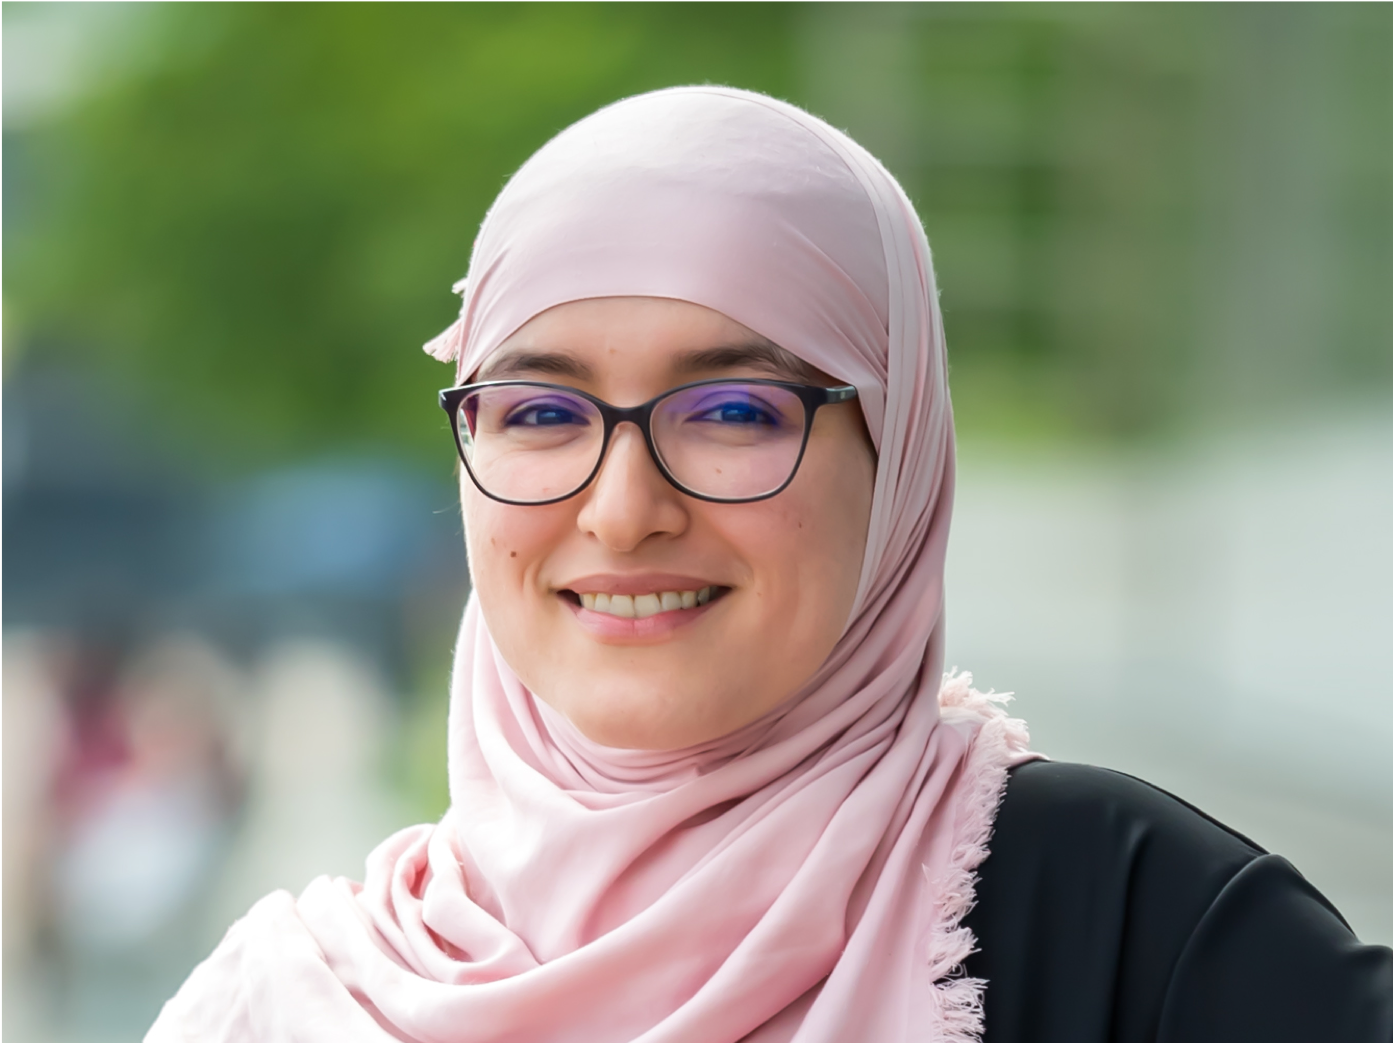 A smiling woman looks at the camera, wearing a pink hijab, a black top and glasses.